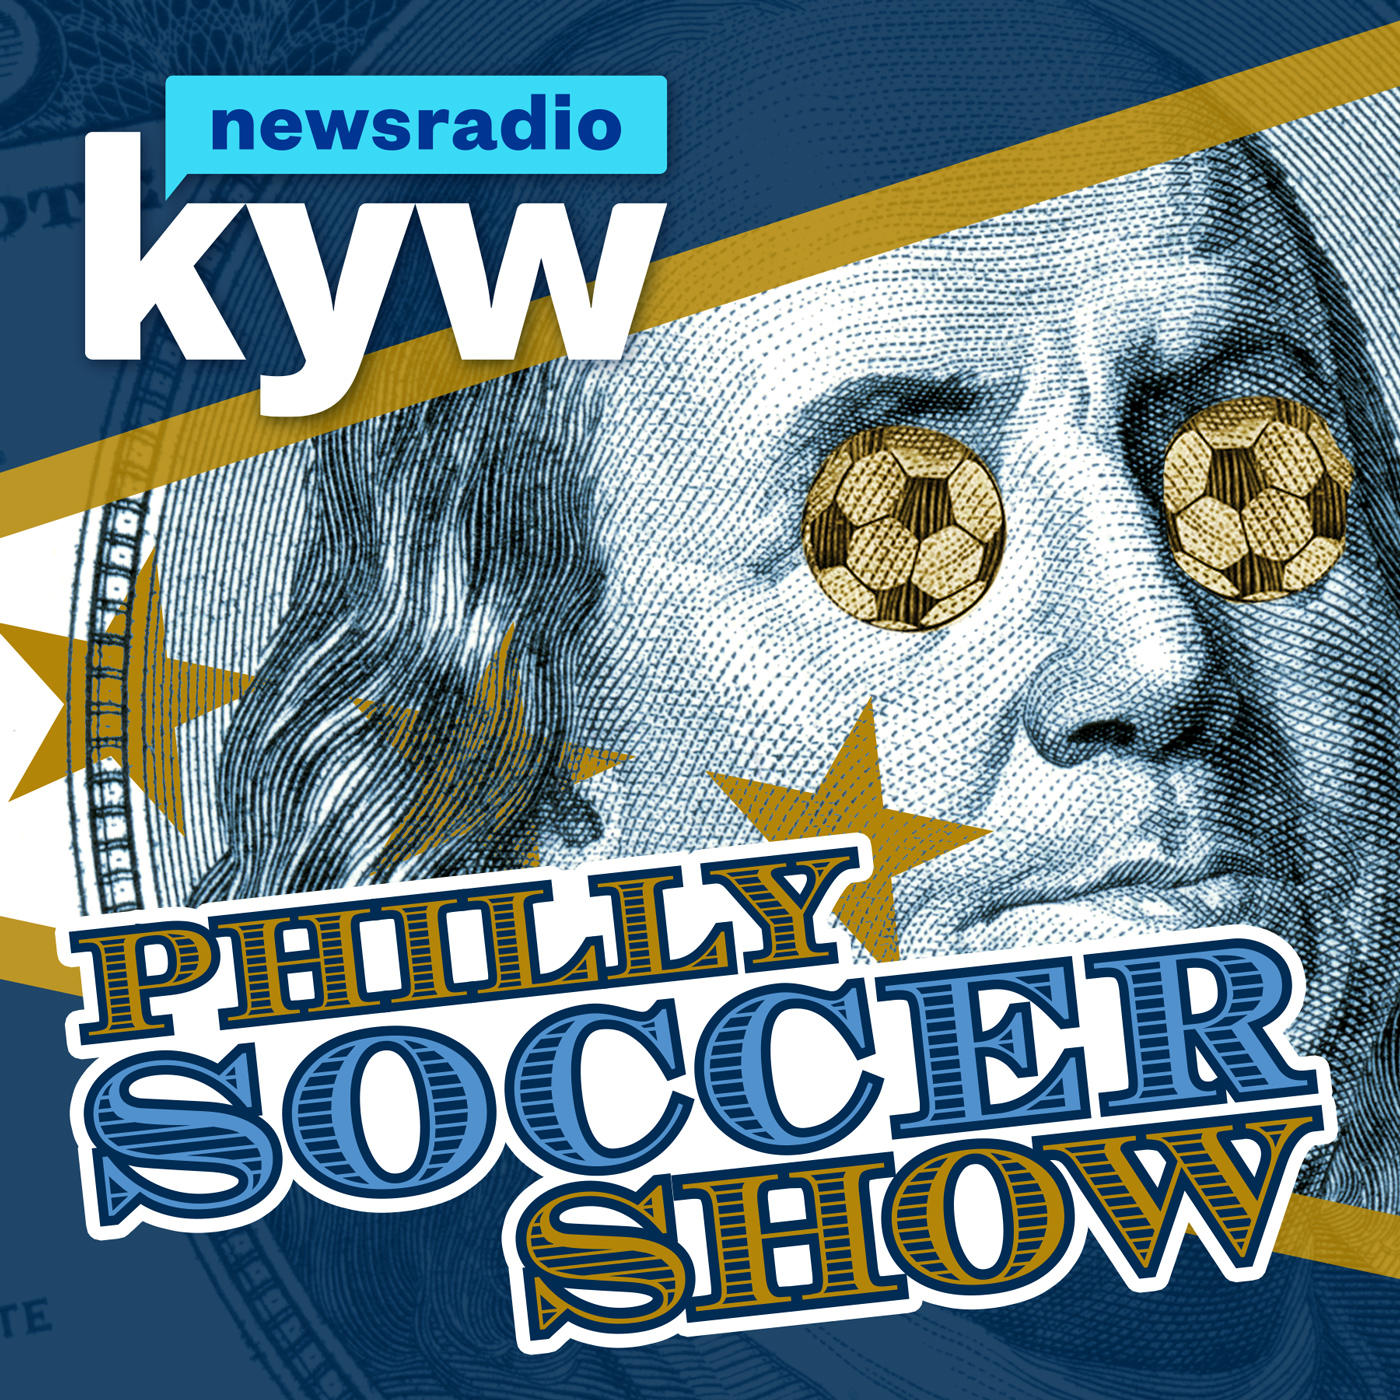 The Philly Soccer Show is back with the first Union update for 2019